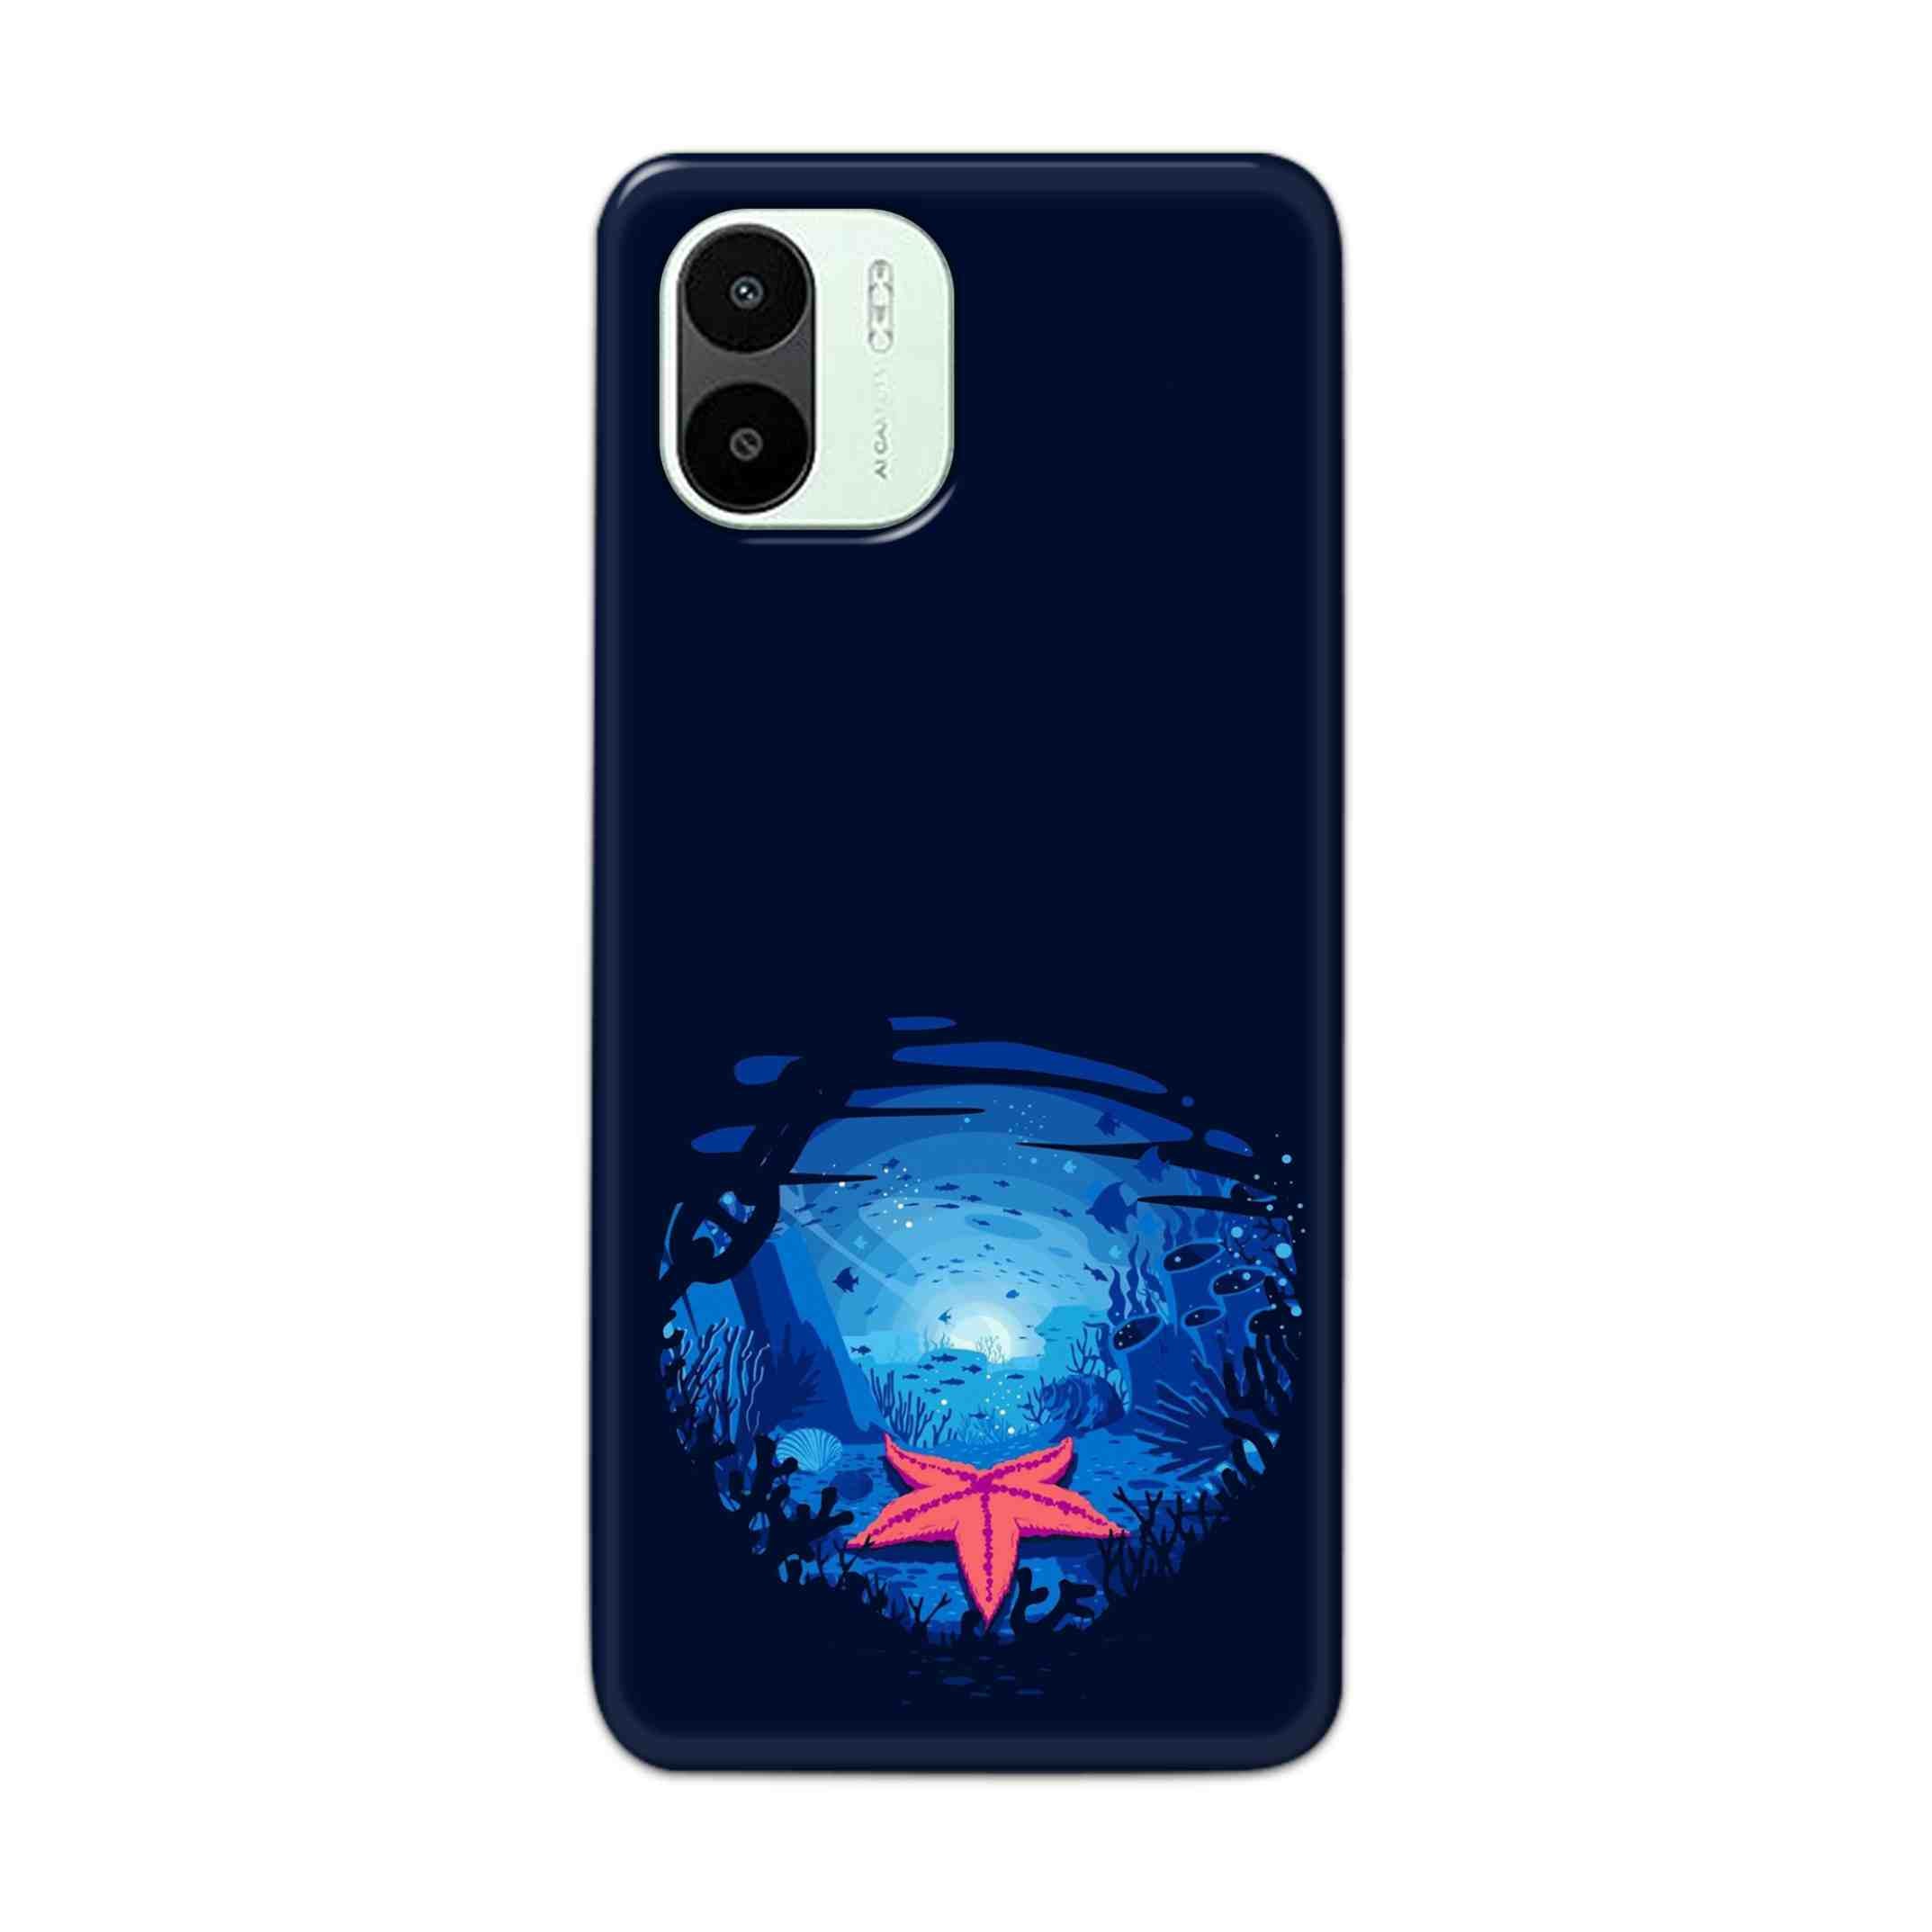 Buy Star Fresh Hard Back Mobile Phone Case Cover For Xiaomi Redmi A1 5G Online